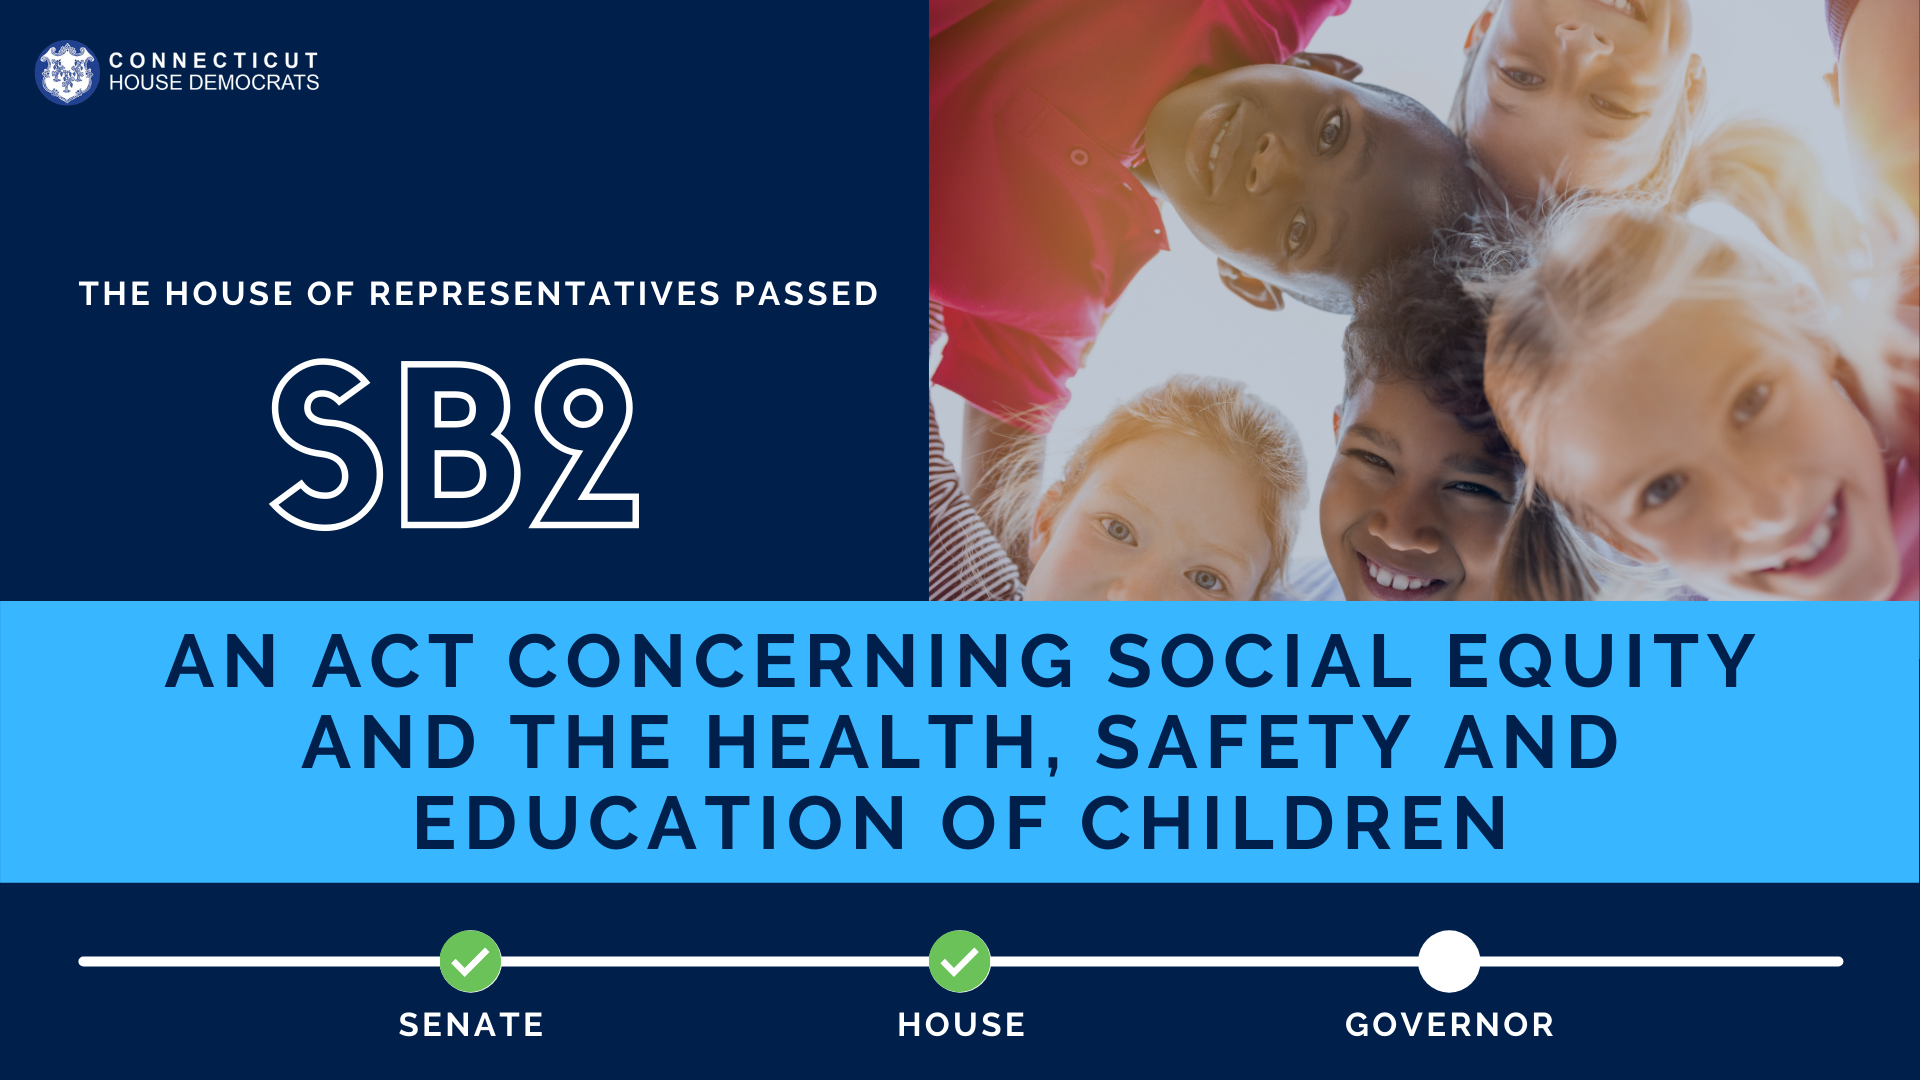 SB2 aimed at helping improve the lives of children